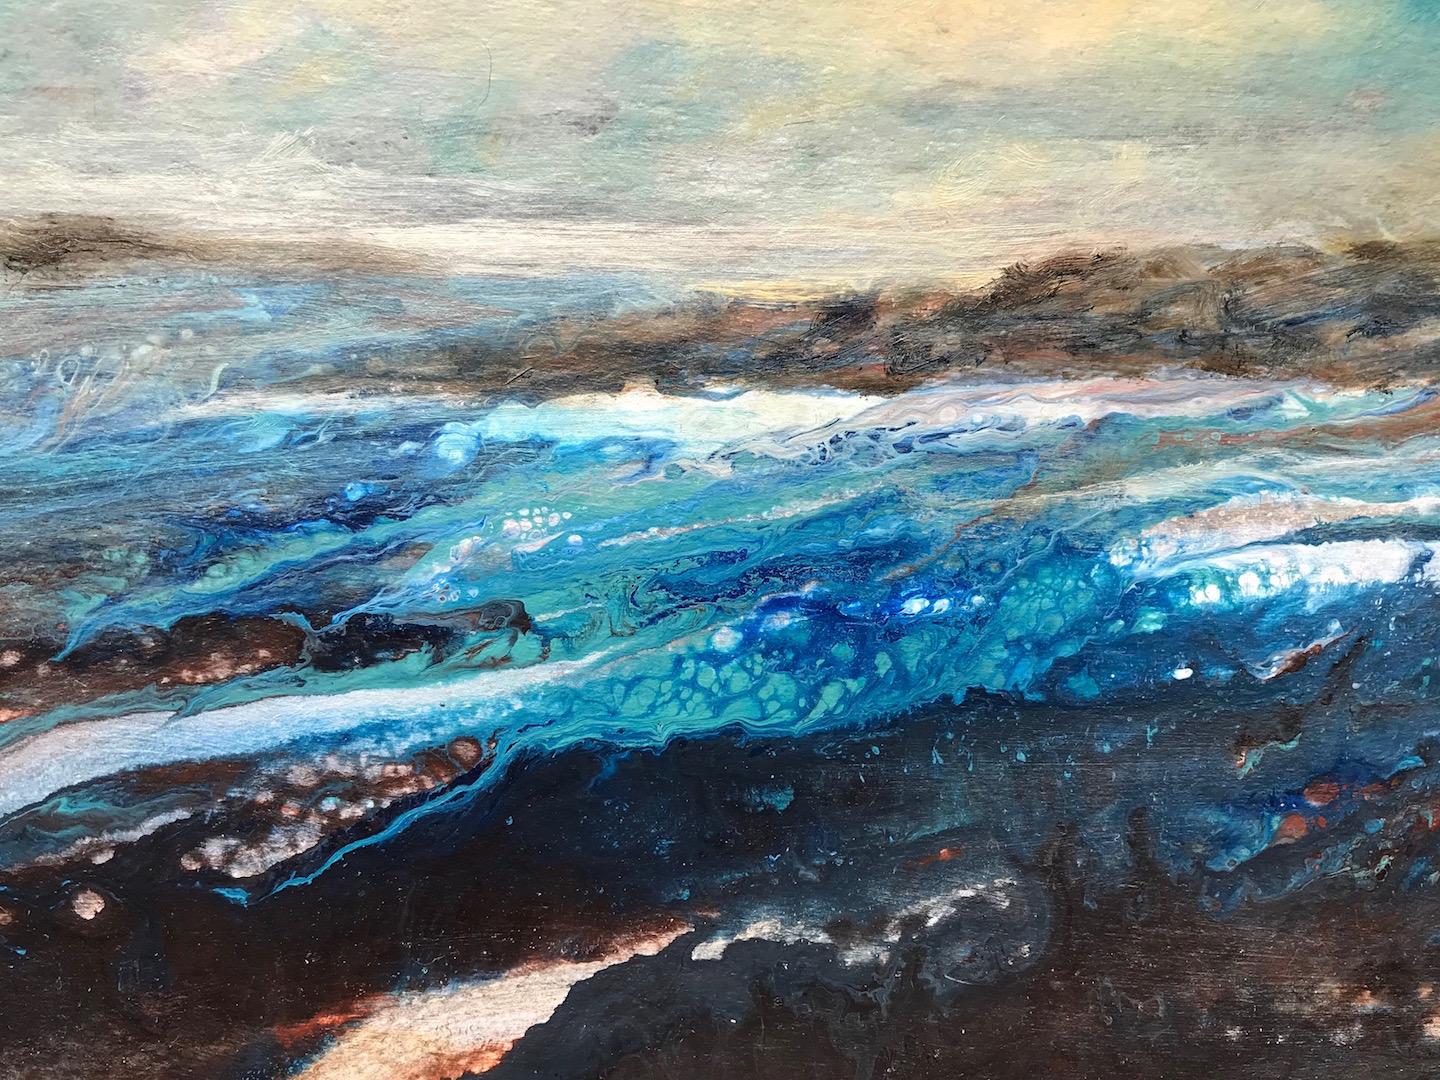 Cathryn Jeff, Sea Swell, Original Mixed Media Painting, Sea Scape, Cornwall Art